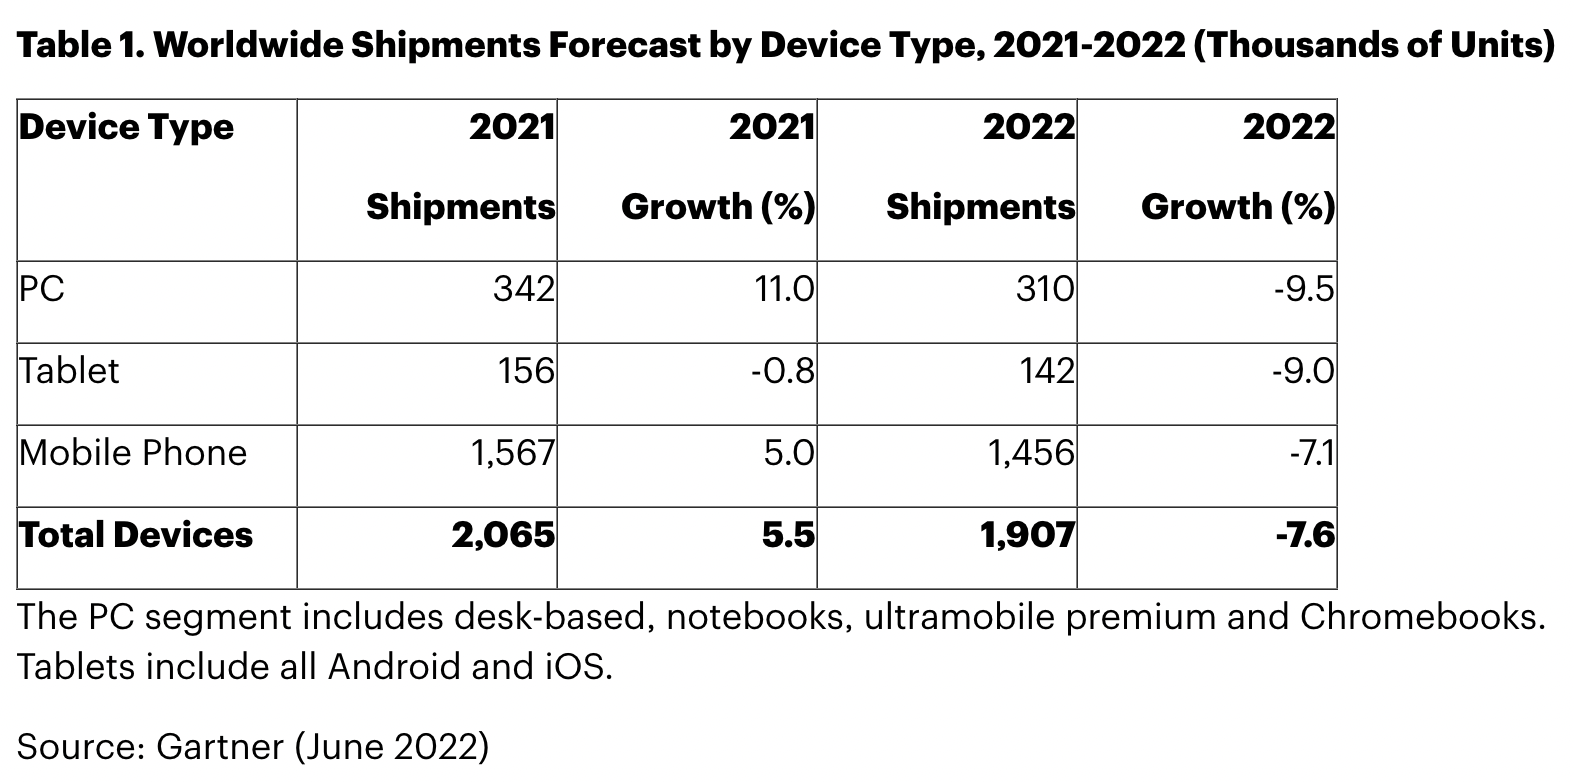 Table from Gartner showing PC sales will be down 9.5 percent for 2022.